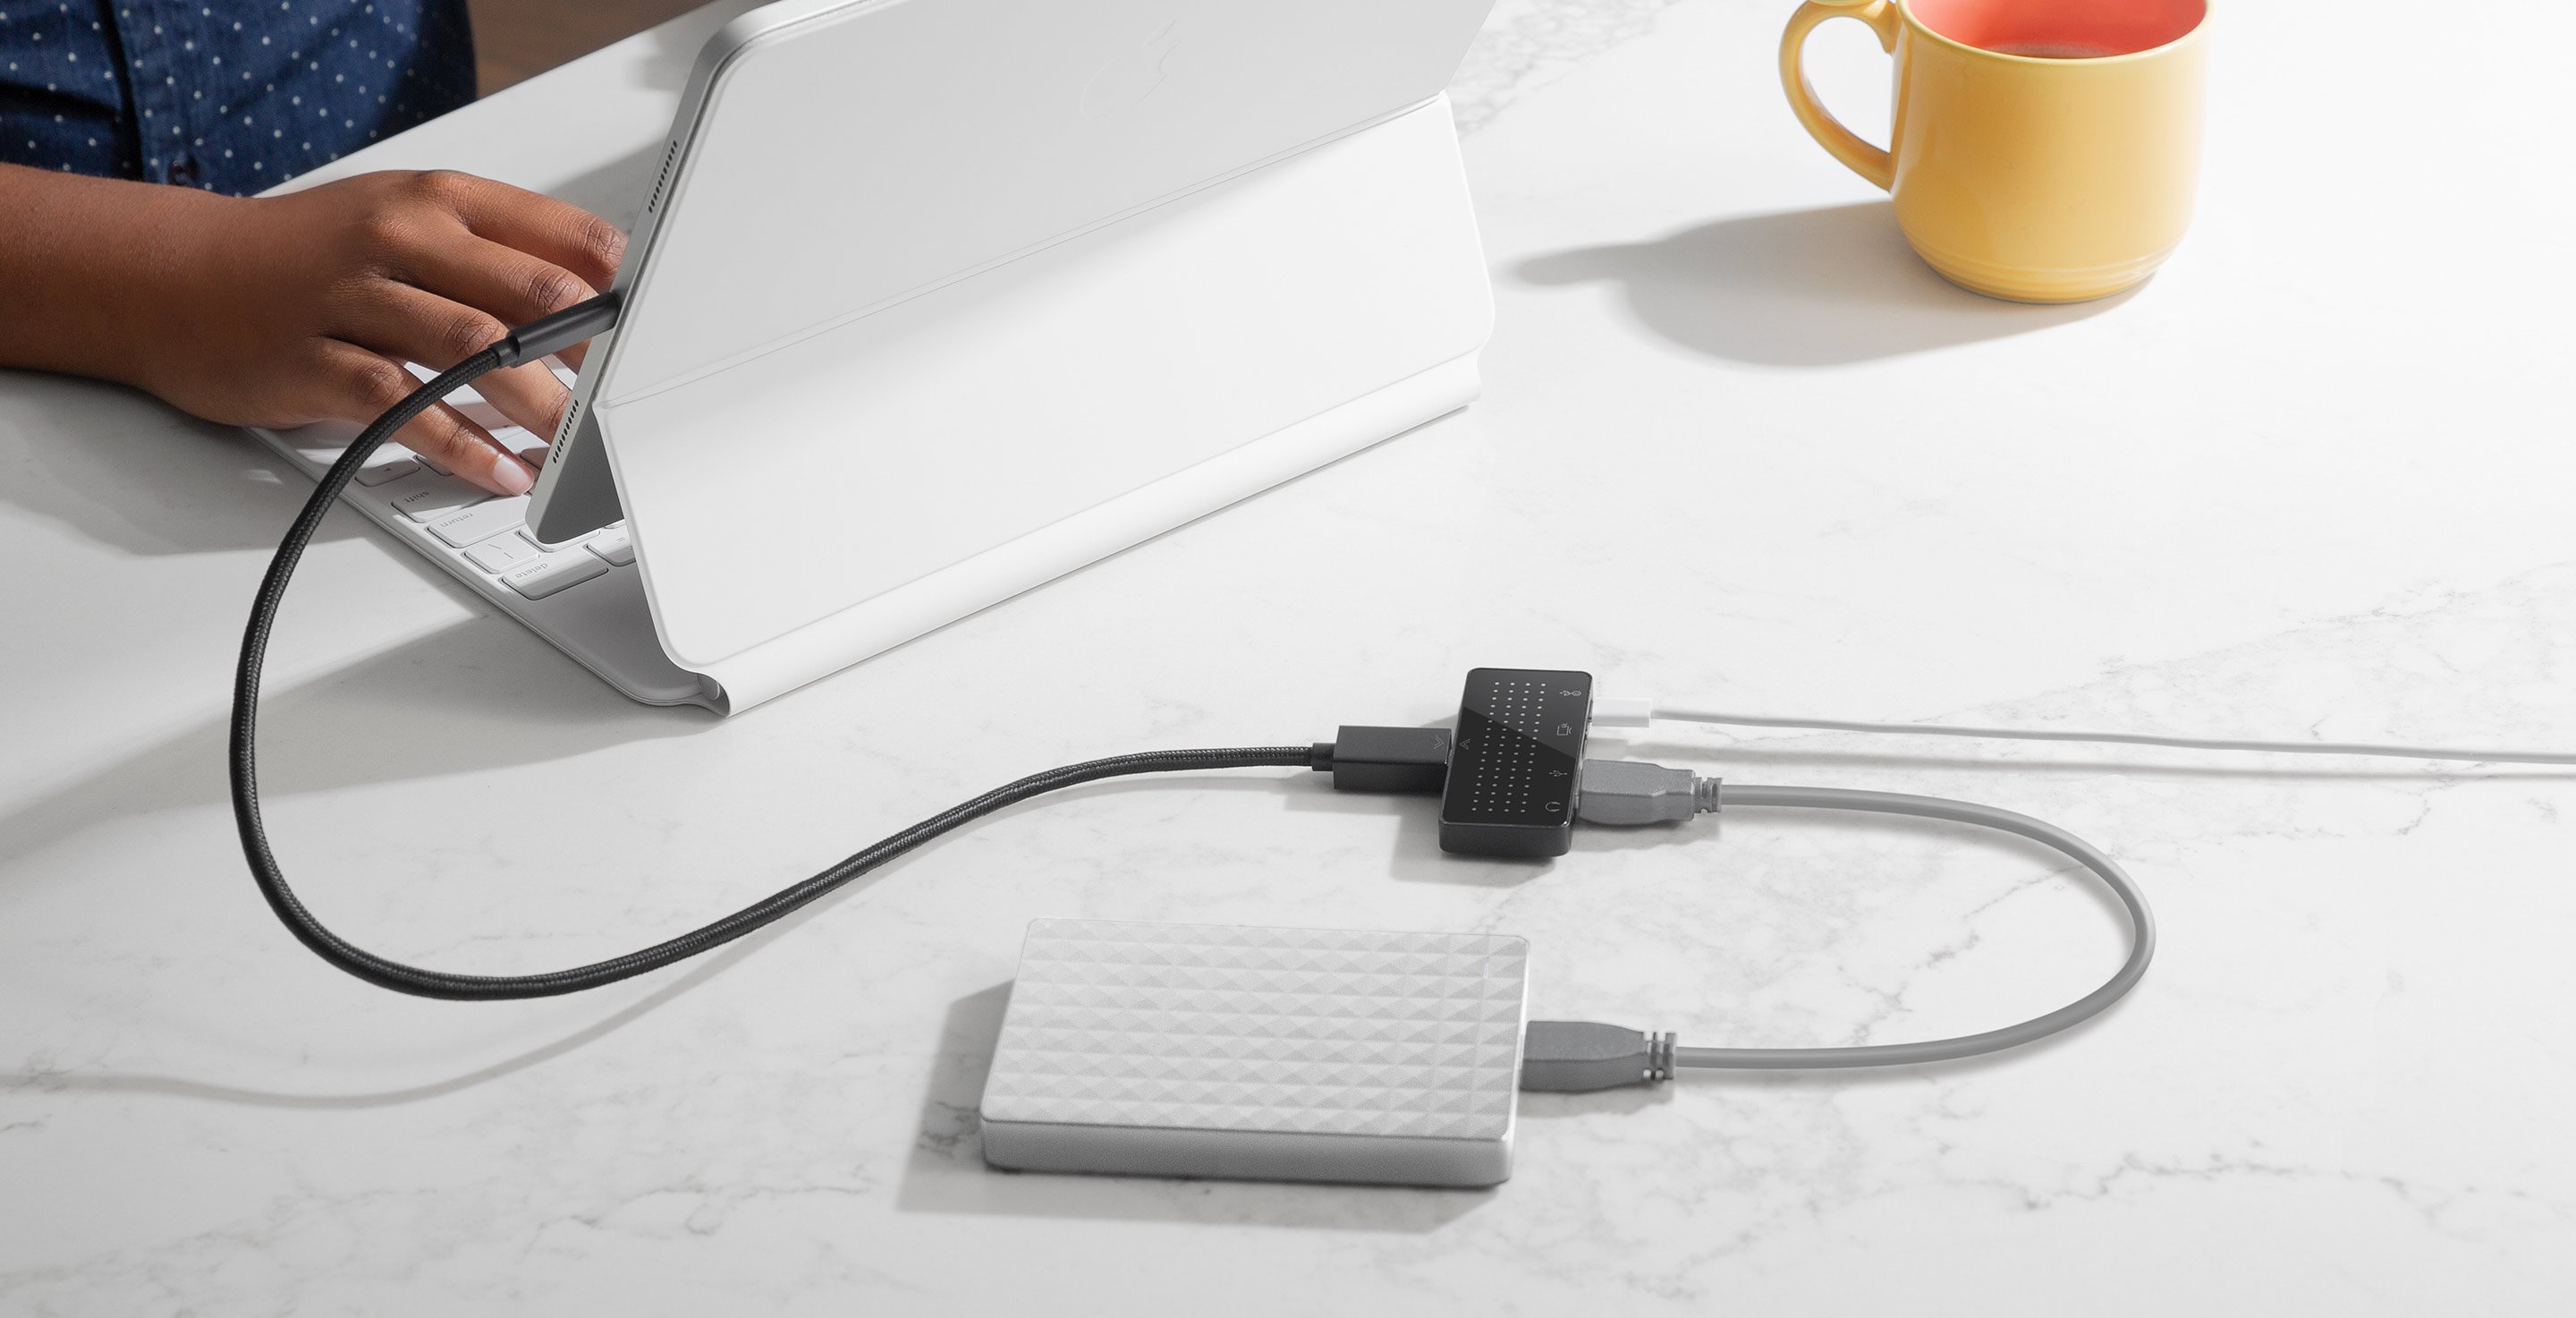 A promotional image from Twelve South showing its StayGo Mini USB-C hub connected to an iPad Air 4